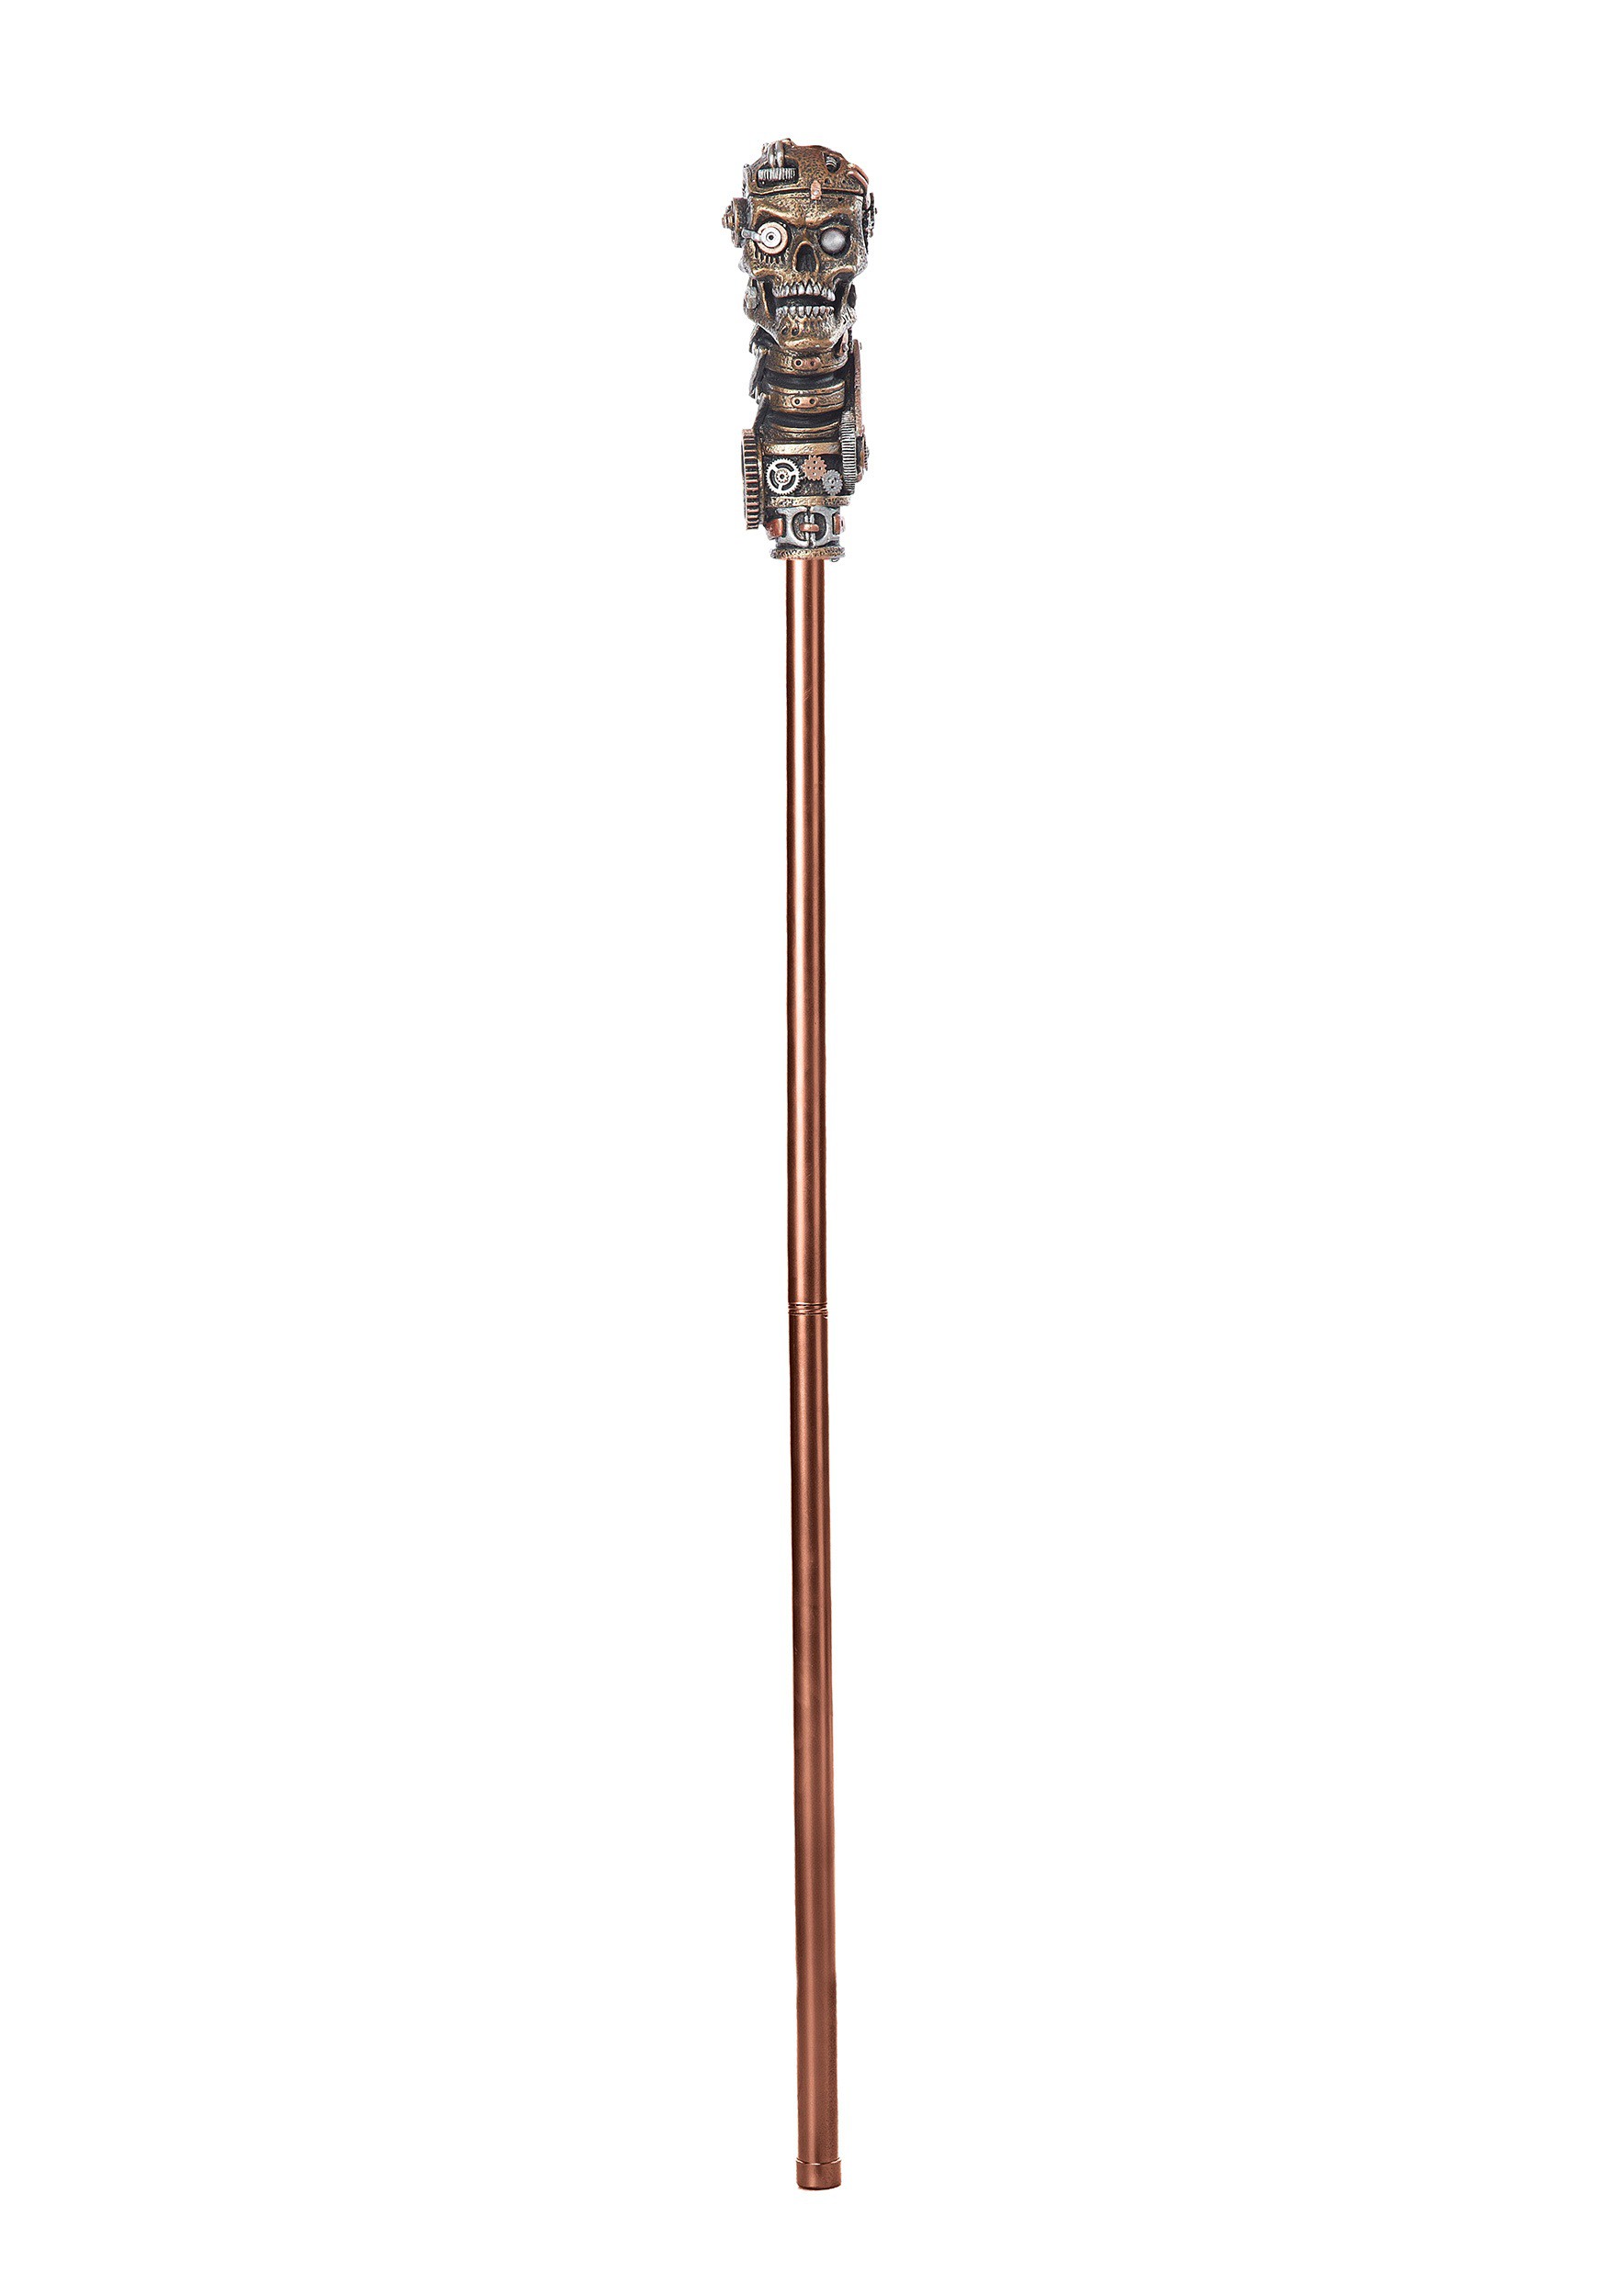  Nicky Bigs Novelties Adult Steampunk Derby Walking Cane - Black  Hollow Stick Vintage Gold Handle - Victorian Cosplay Costume Accessory Prop  : Clothing, Shoes & Jewelry